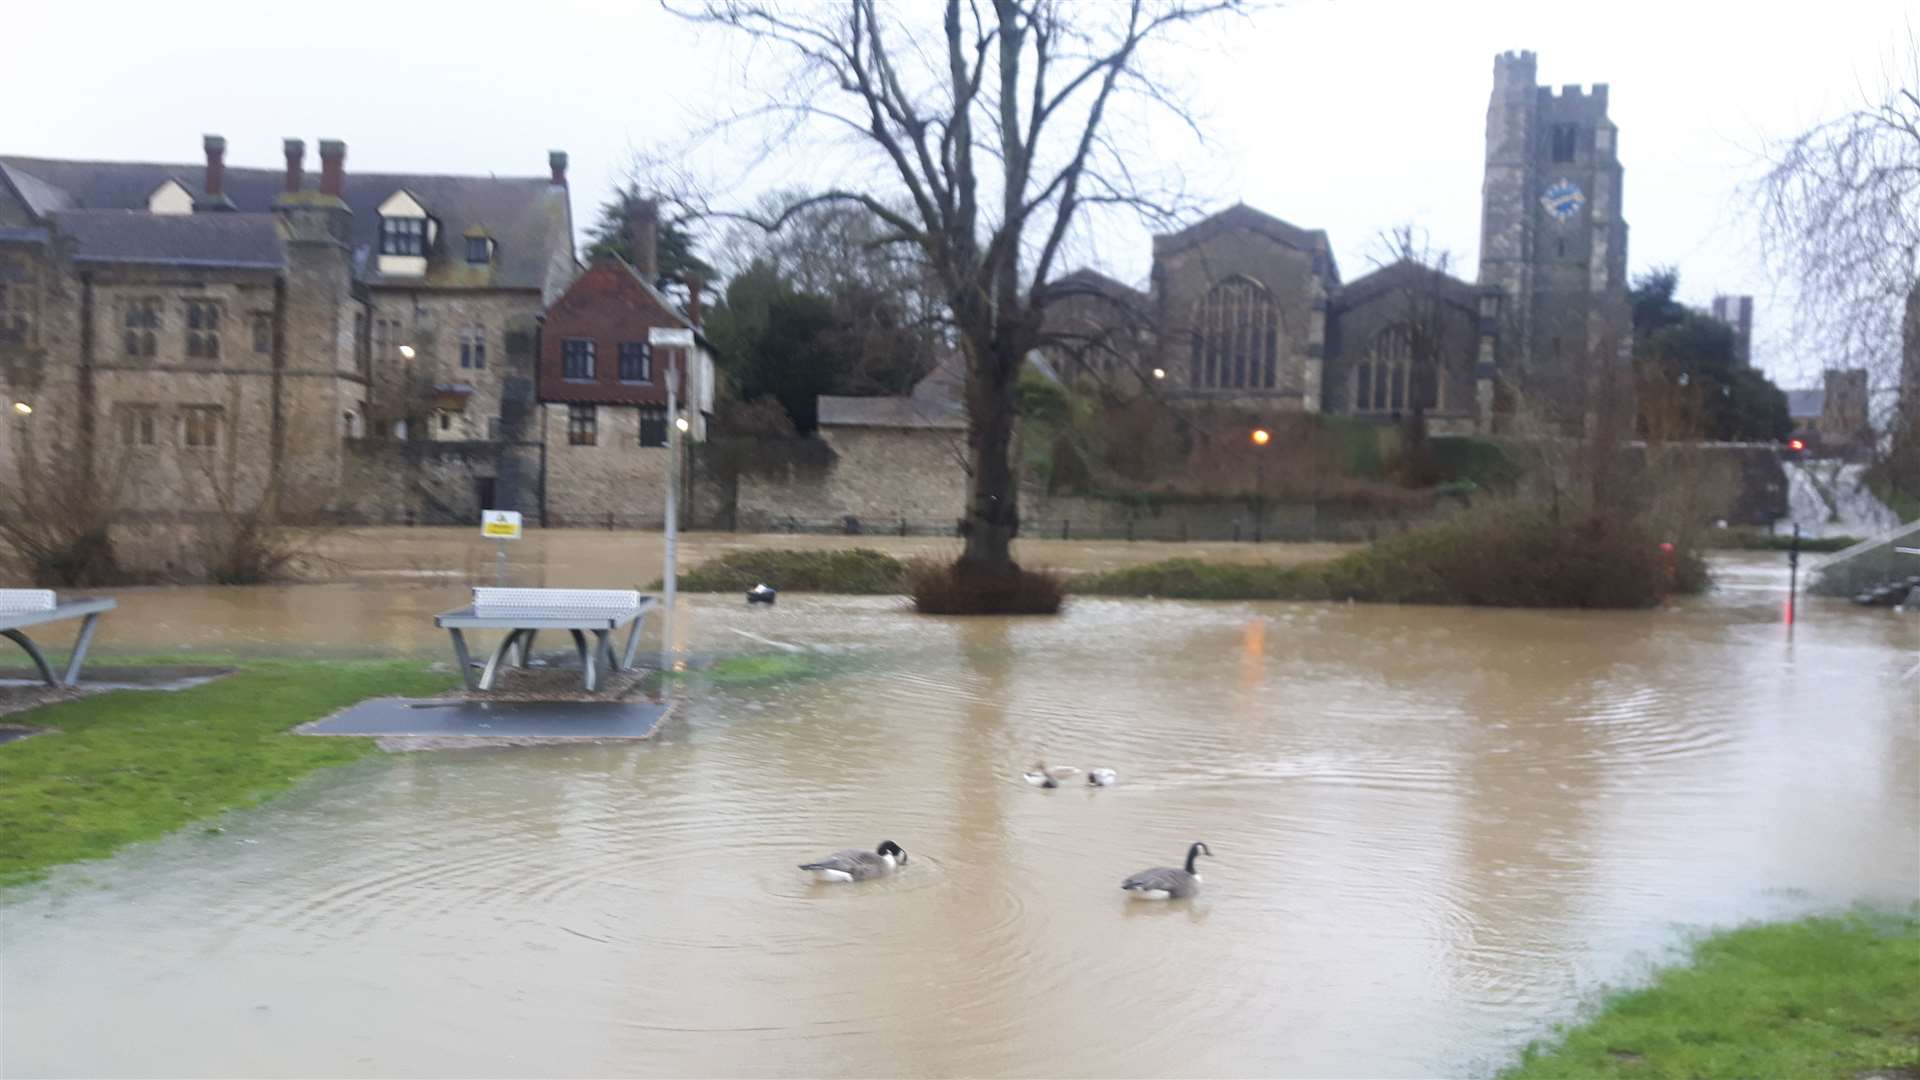 Flooding at Lockmeadow in Maidstone earlier this month